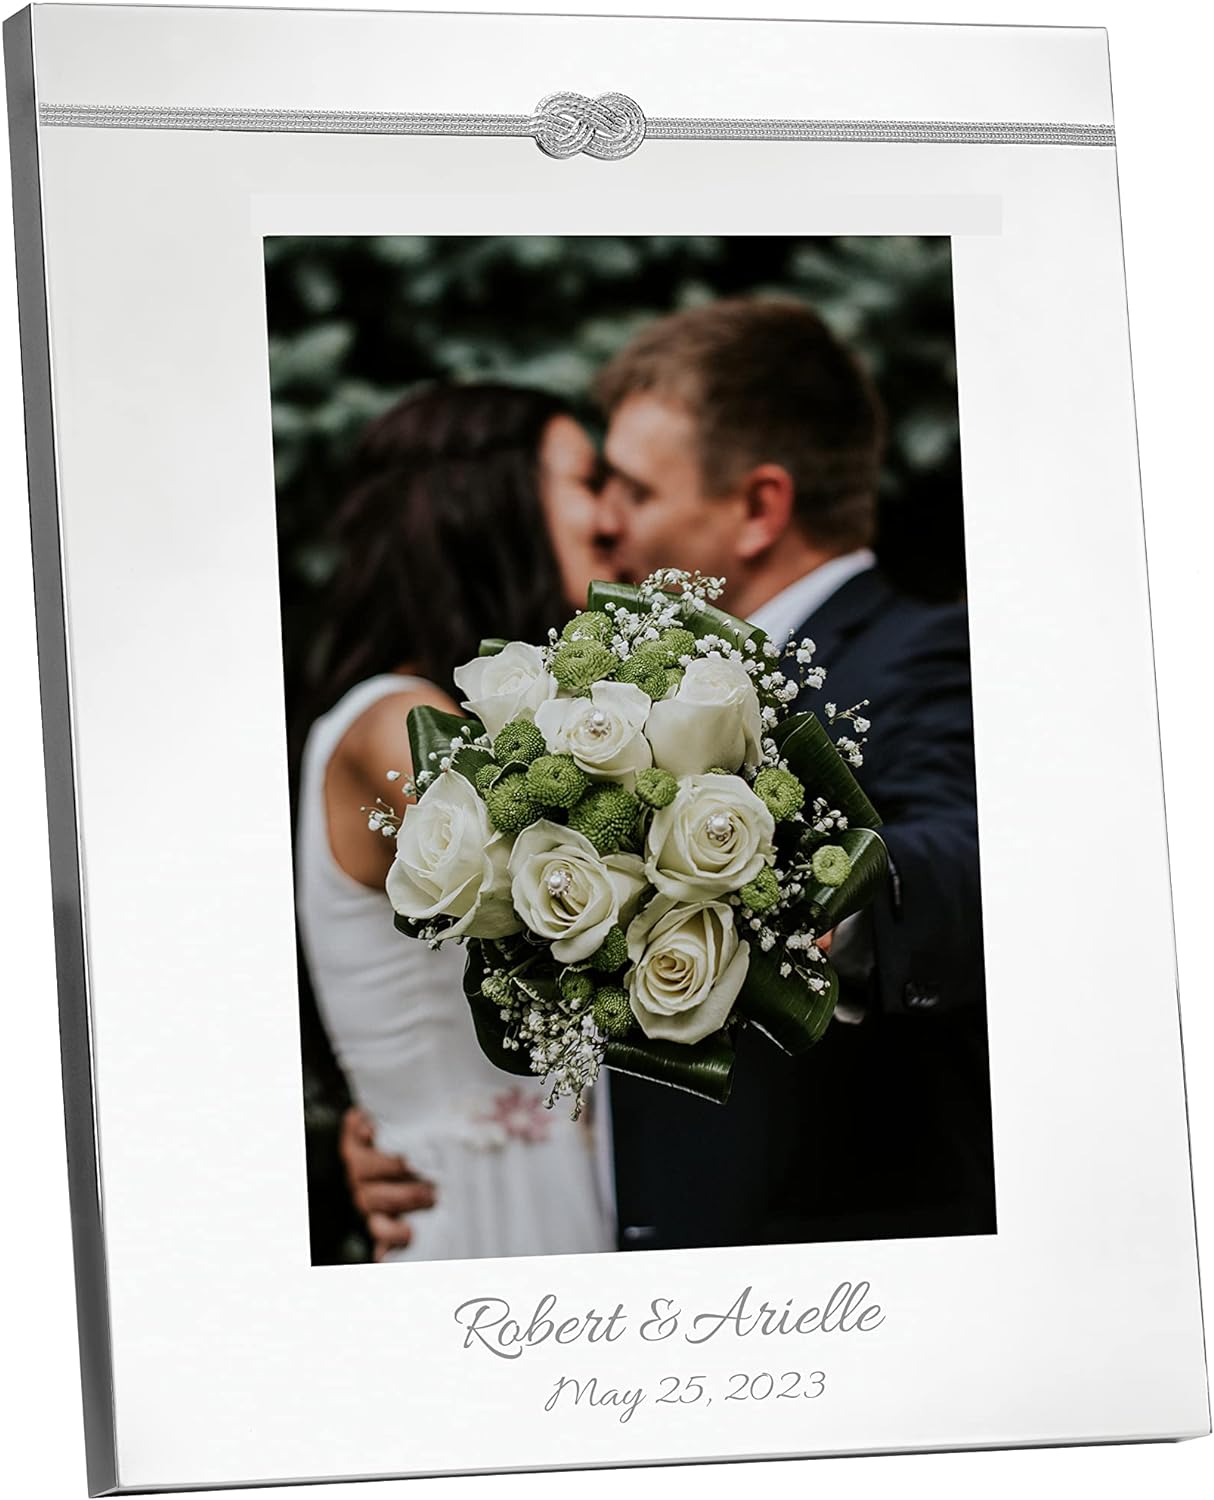 Wedgwood Vera Wang Personalized Infinity 8x10 Wedding Picture Frame, Custom Engraved Silver 8x10 Frame for Wedding, Anniversary, Bride and Groom Photos